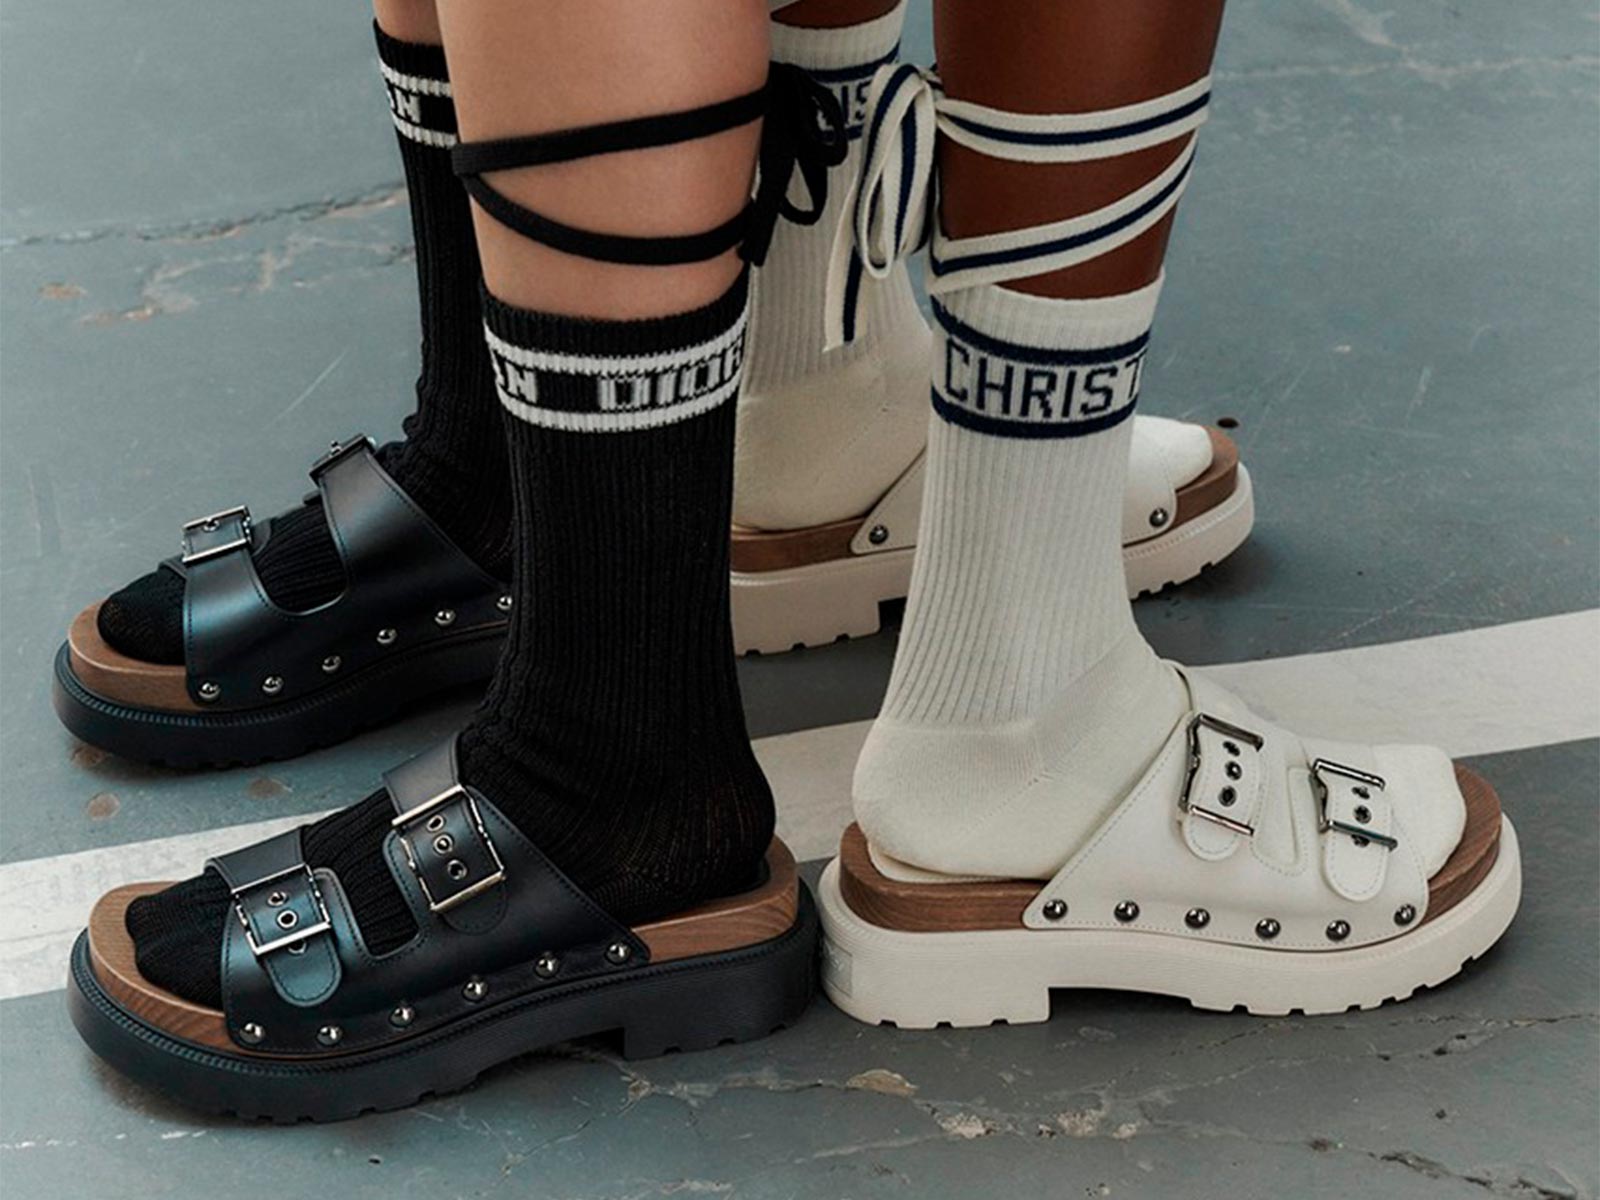 New MUSTS unlocked: The ‘DIORQUAKE’ sandal and clog by Dior